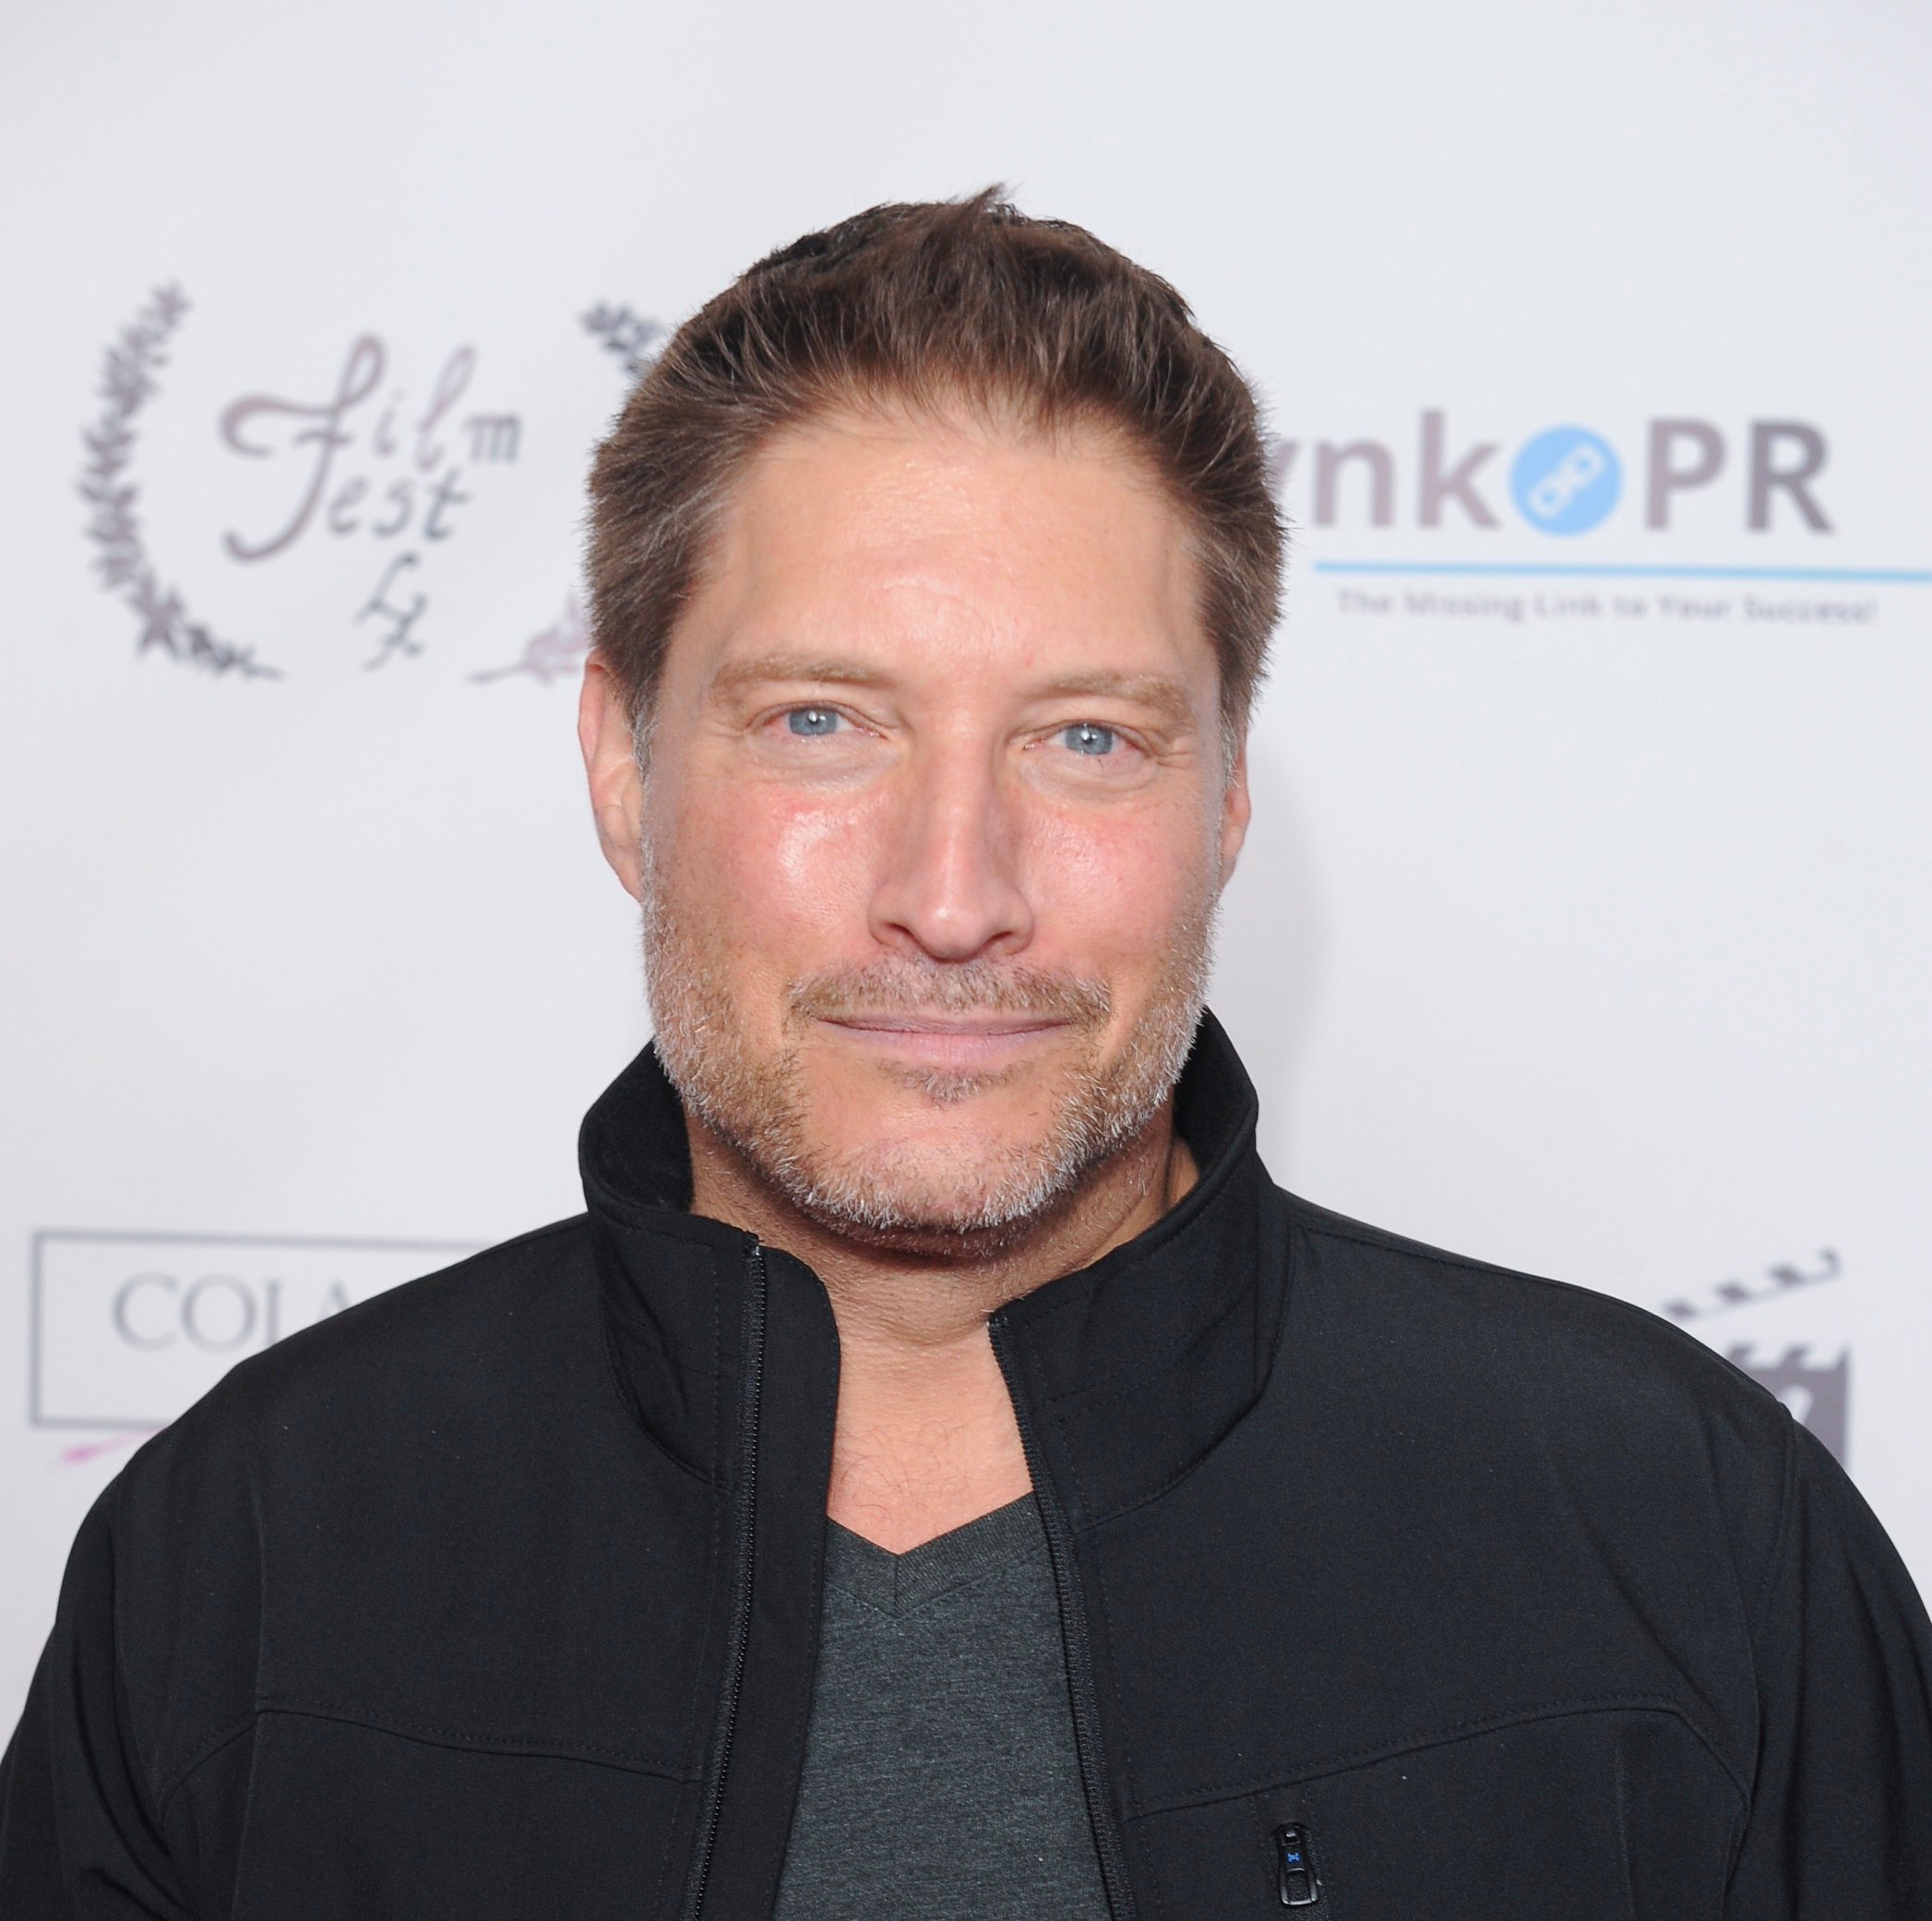 'The Bold and the Beautiful' star Sean Kanan wearing a grey shirt and black jacket; while posing for photographers.